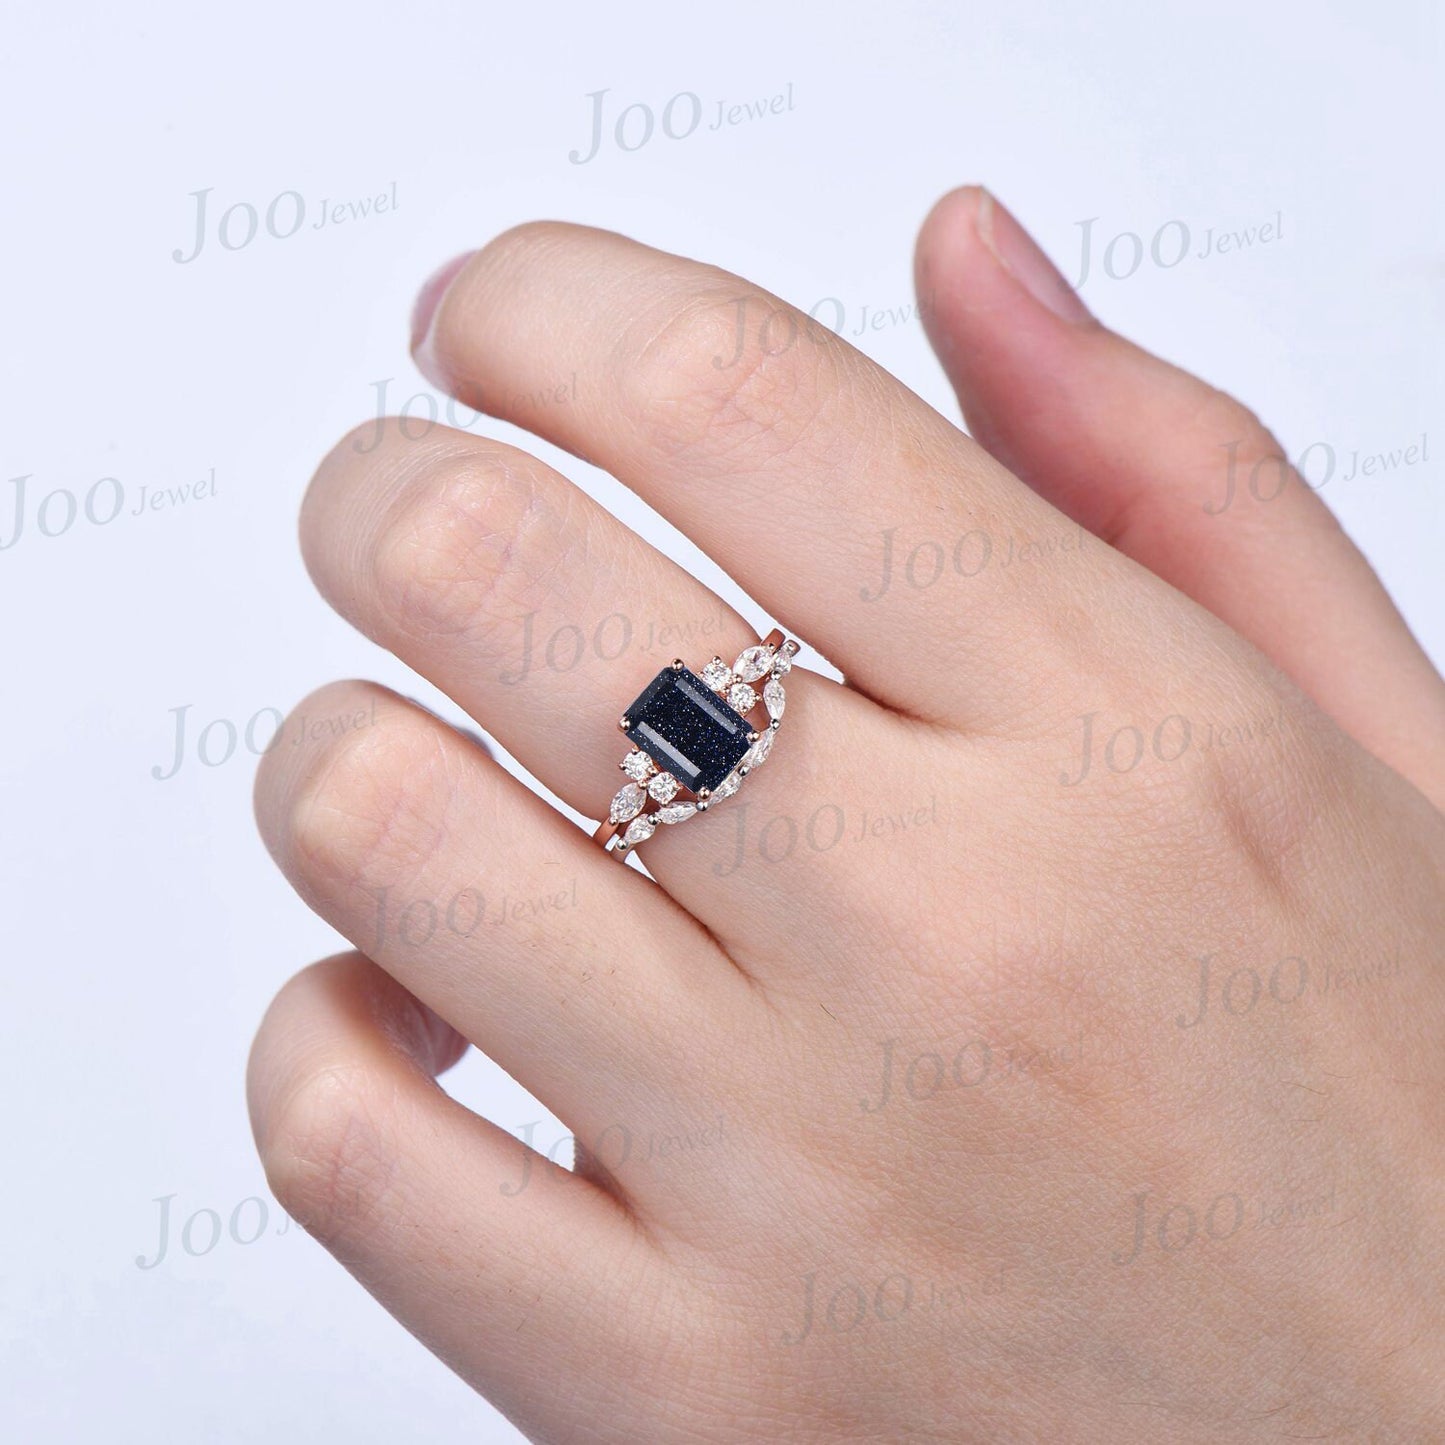 2ct Emerald Cut Galaxy Blue Sandstone Ring Set 10K Rose Gold Blue Gemstone Jewelry Pear Moissanite Curve Band Personalized Promise Gifts